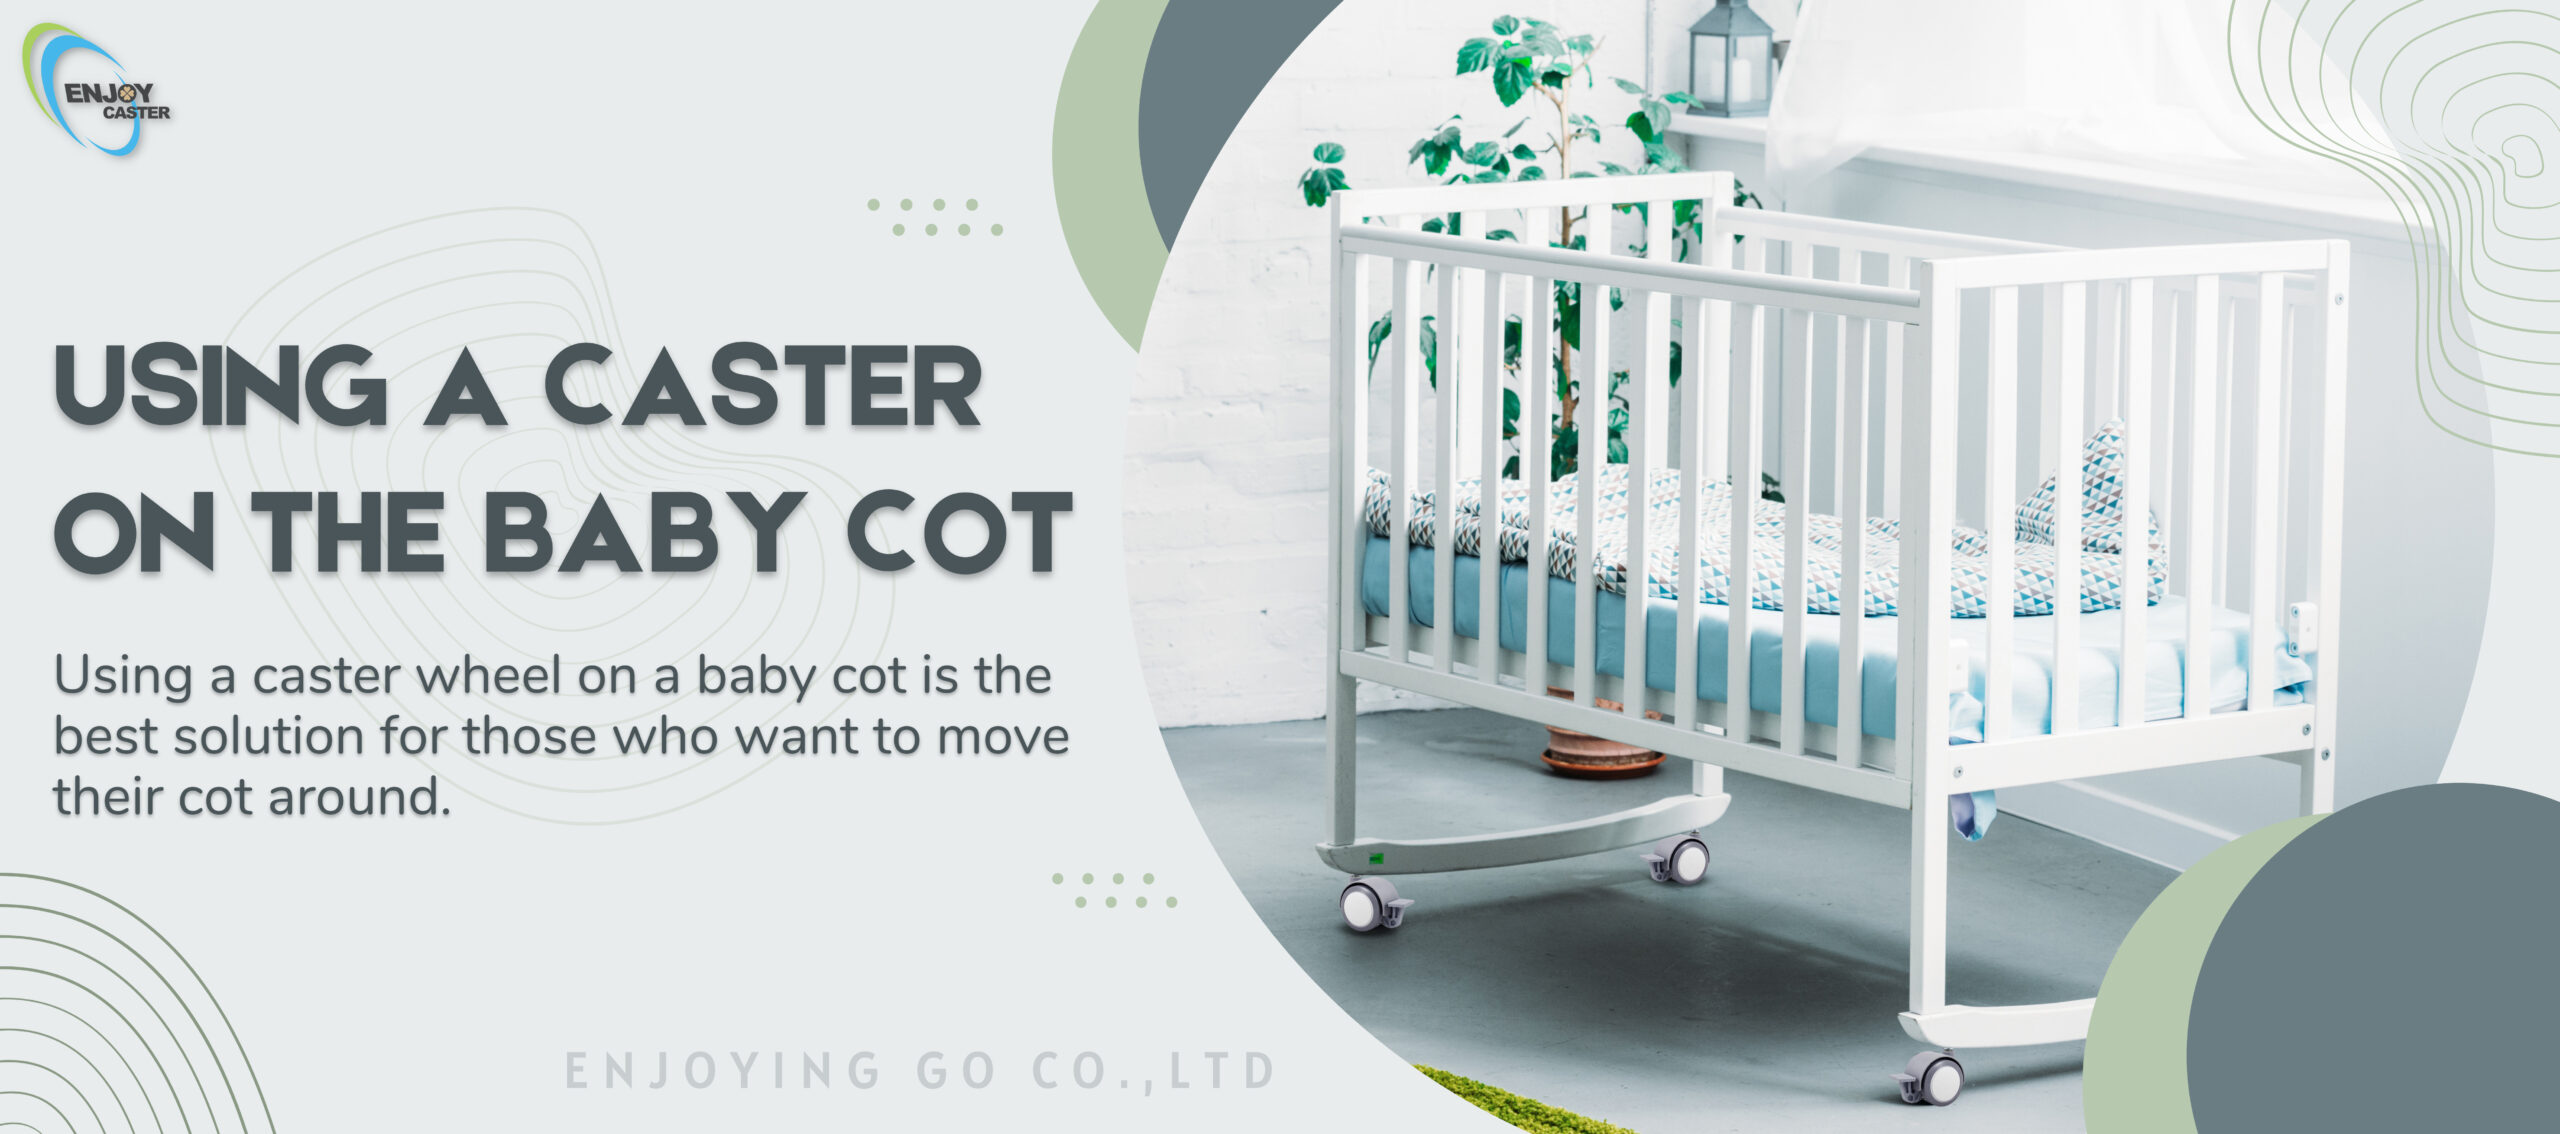 Using a caster on the Baby cot